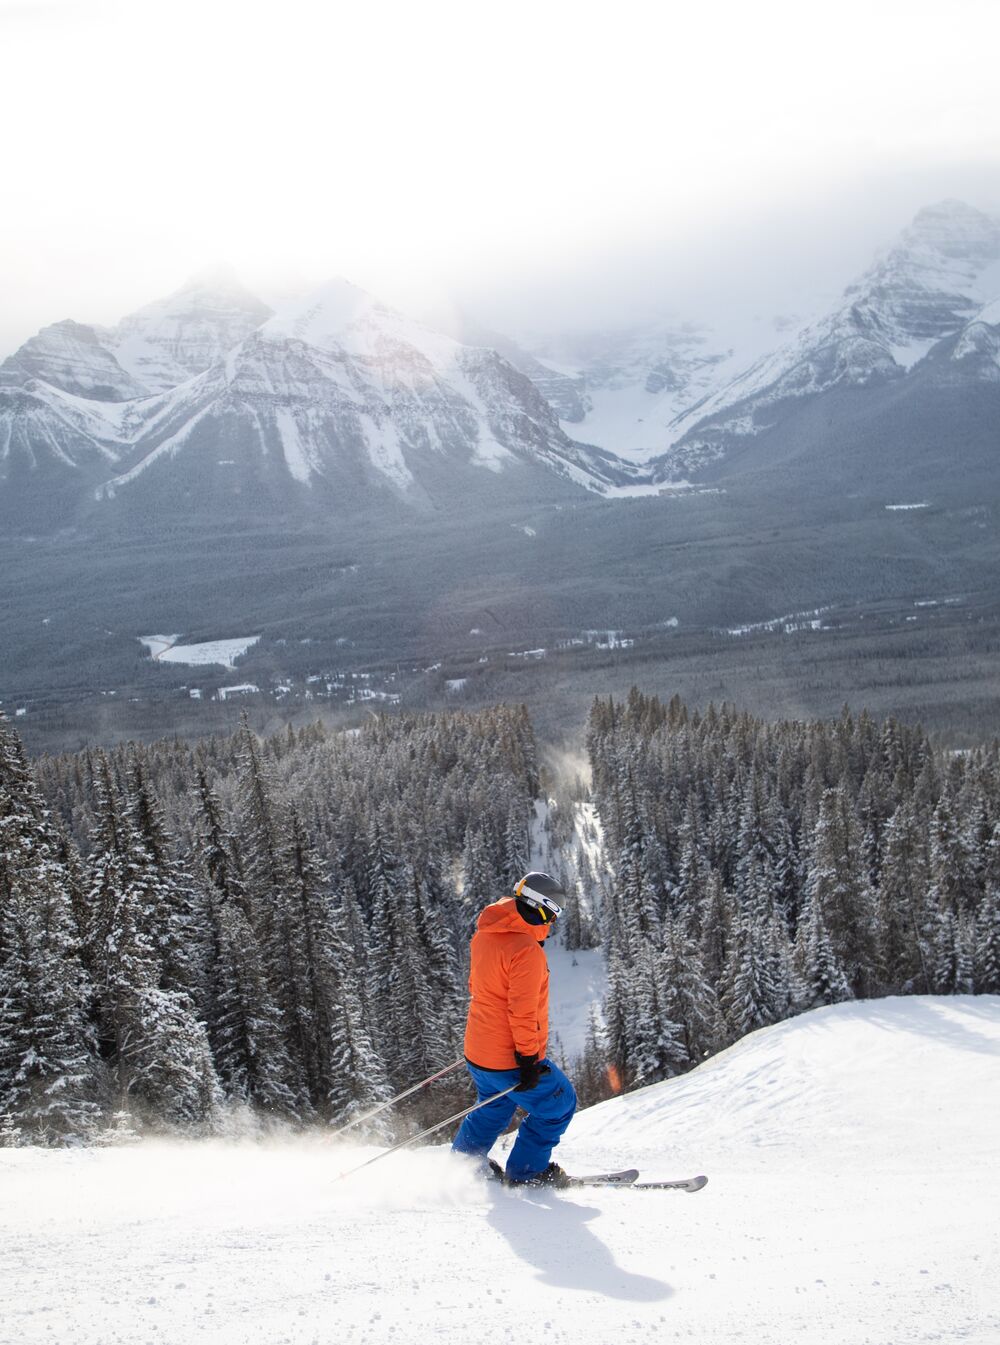 A skier on the start of a run at Lake Louise Ski Resort looking at a mountain range with snowy trees in front of them in Banff National Park.